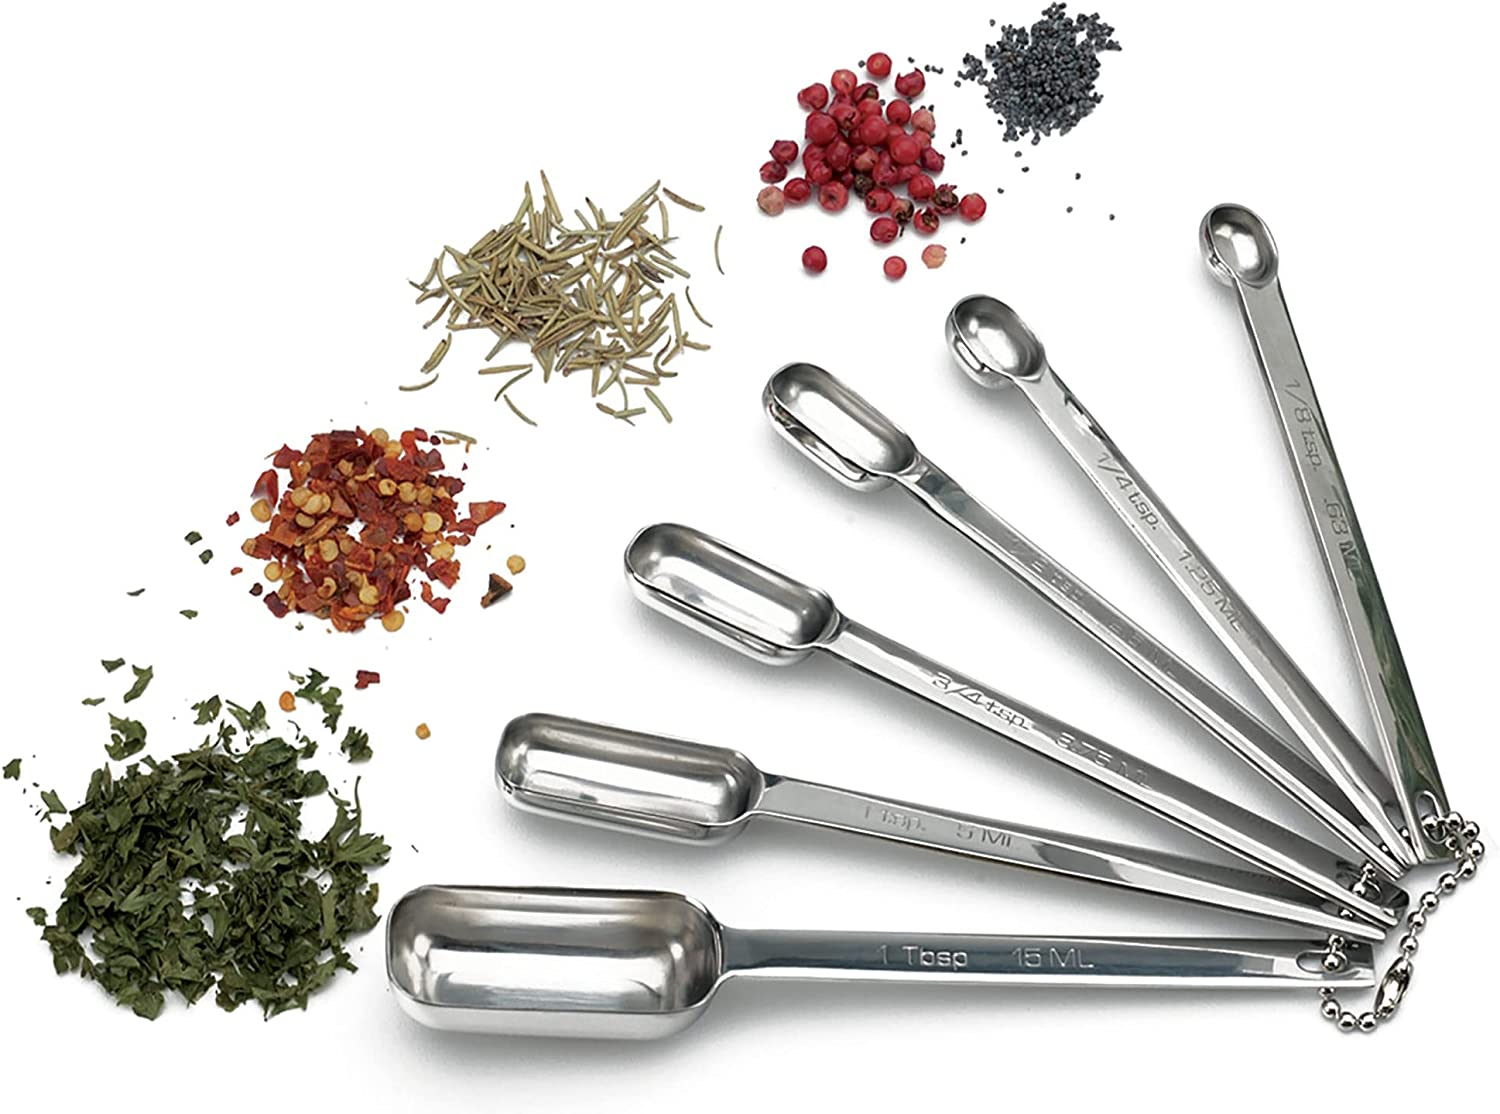 Cuisipro 5 -Piece Stainless Steel Measuring Spoon Set